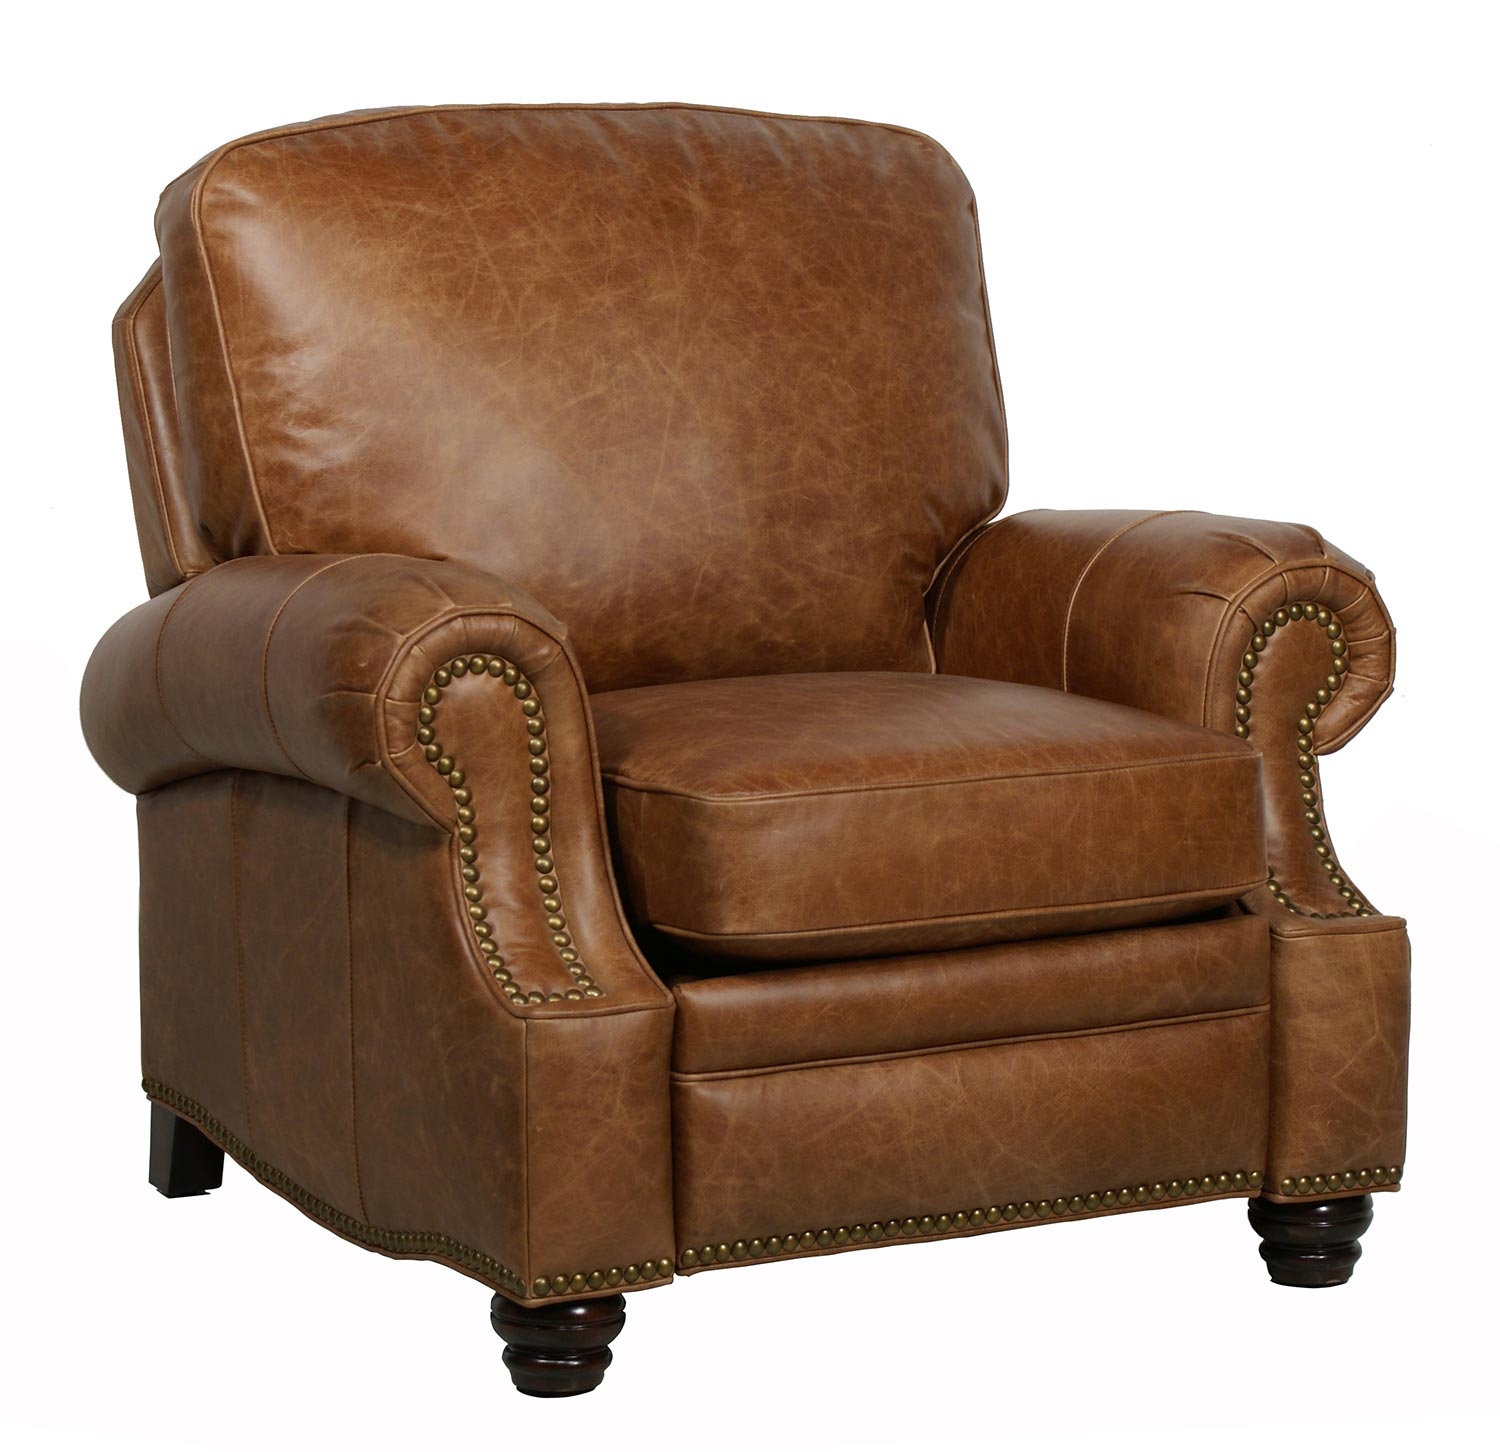 Top Grain Leather Recliner Visualhunt, Real Leather Recliners